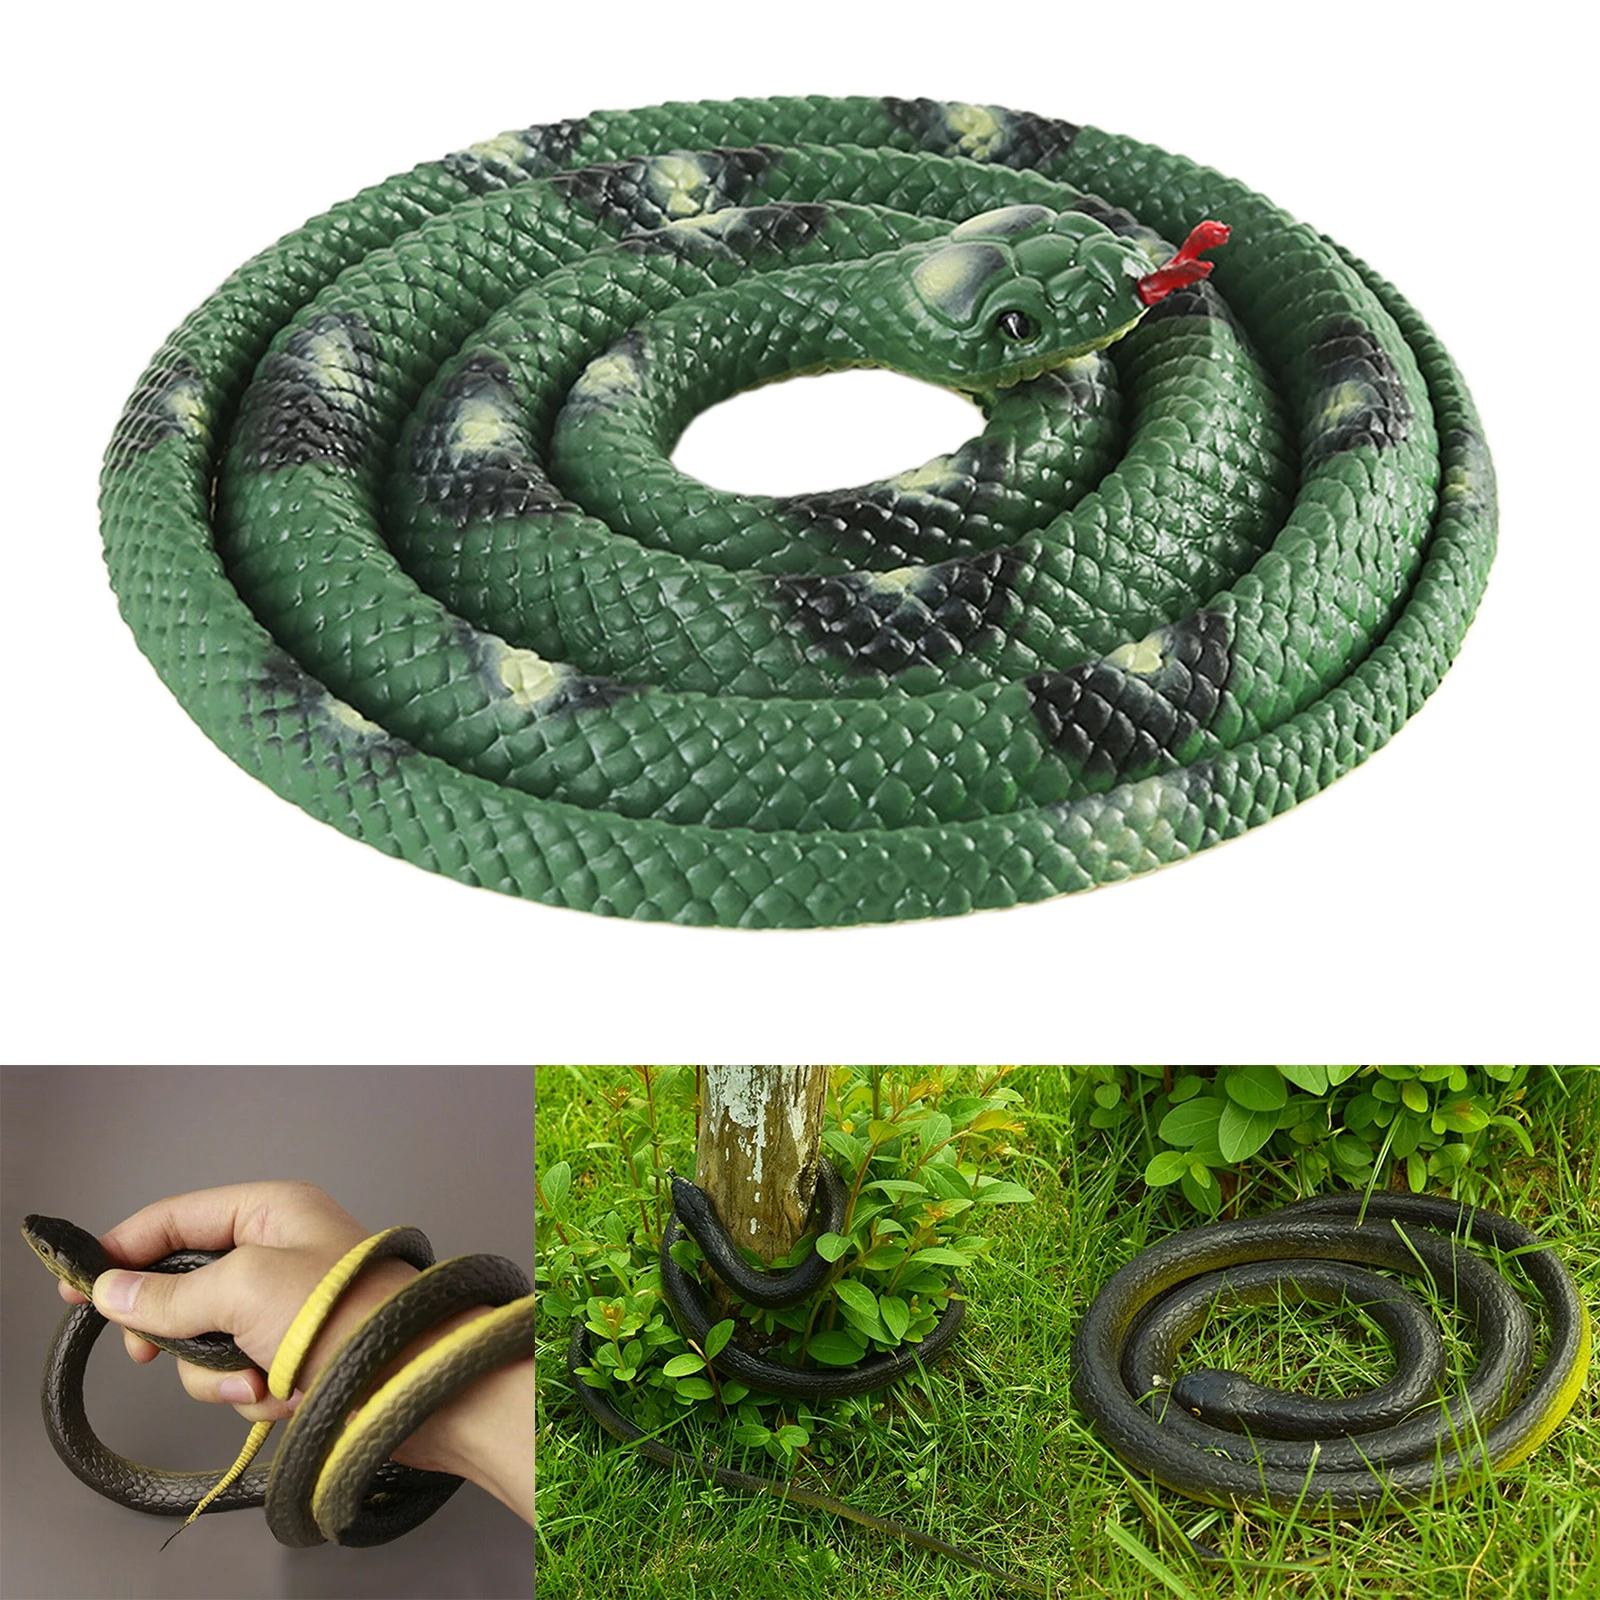 2 asst LARGE 24 IN RUBBER SNAKES realistic fake play snake TOY REPTILE NEW  gags